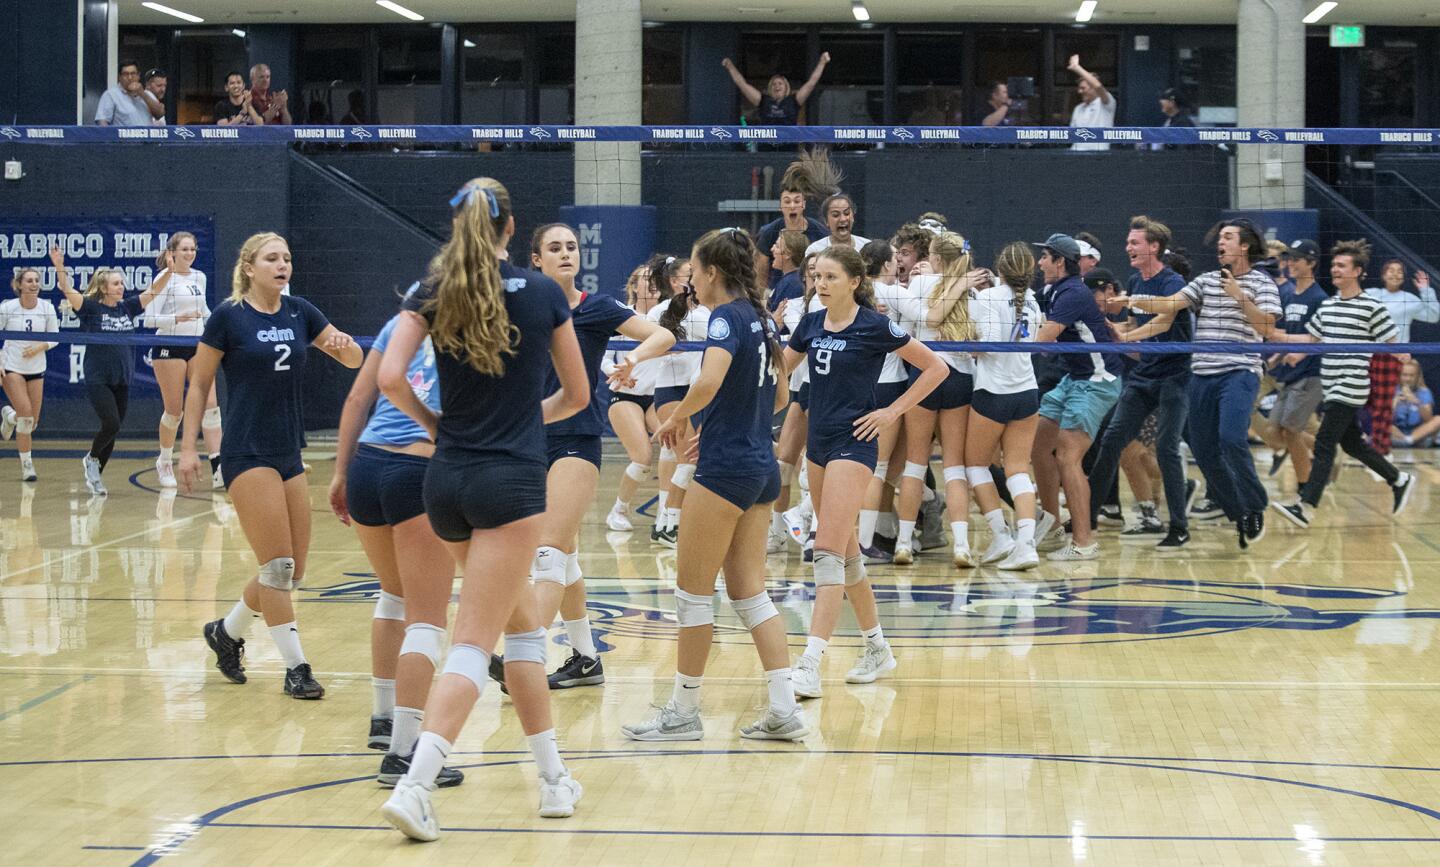 Trabuco Hills celebrates after beating Corona del Mar in a game five tie breaker during a quarterfinals game of the CIF Southern Section Division 2 playoffs on Wednesday, October 24.